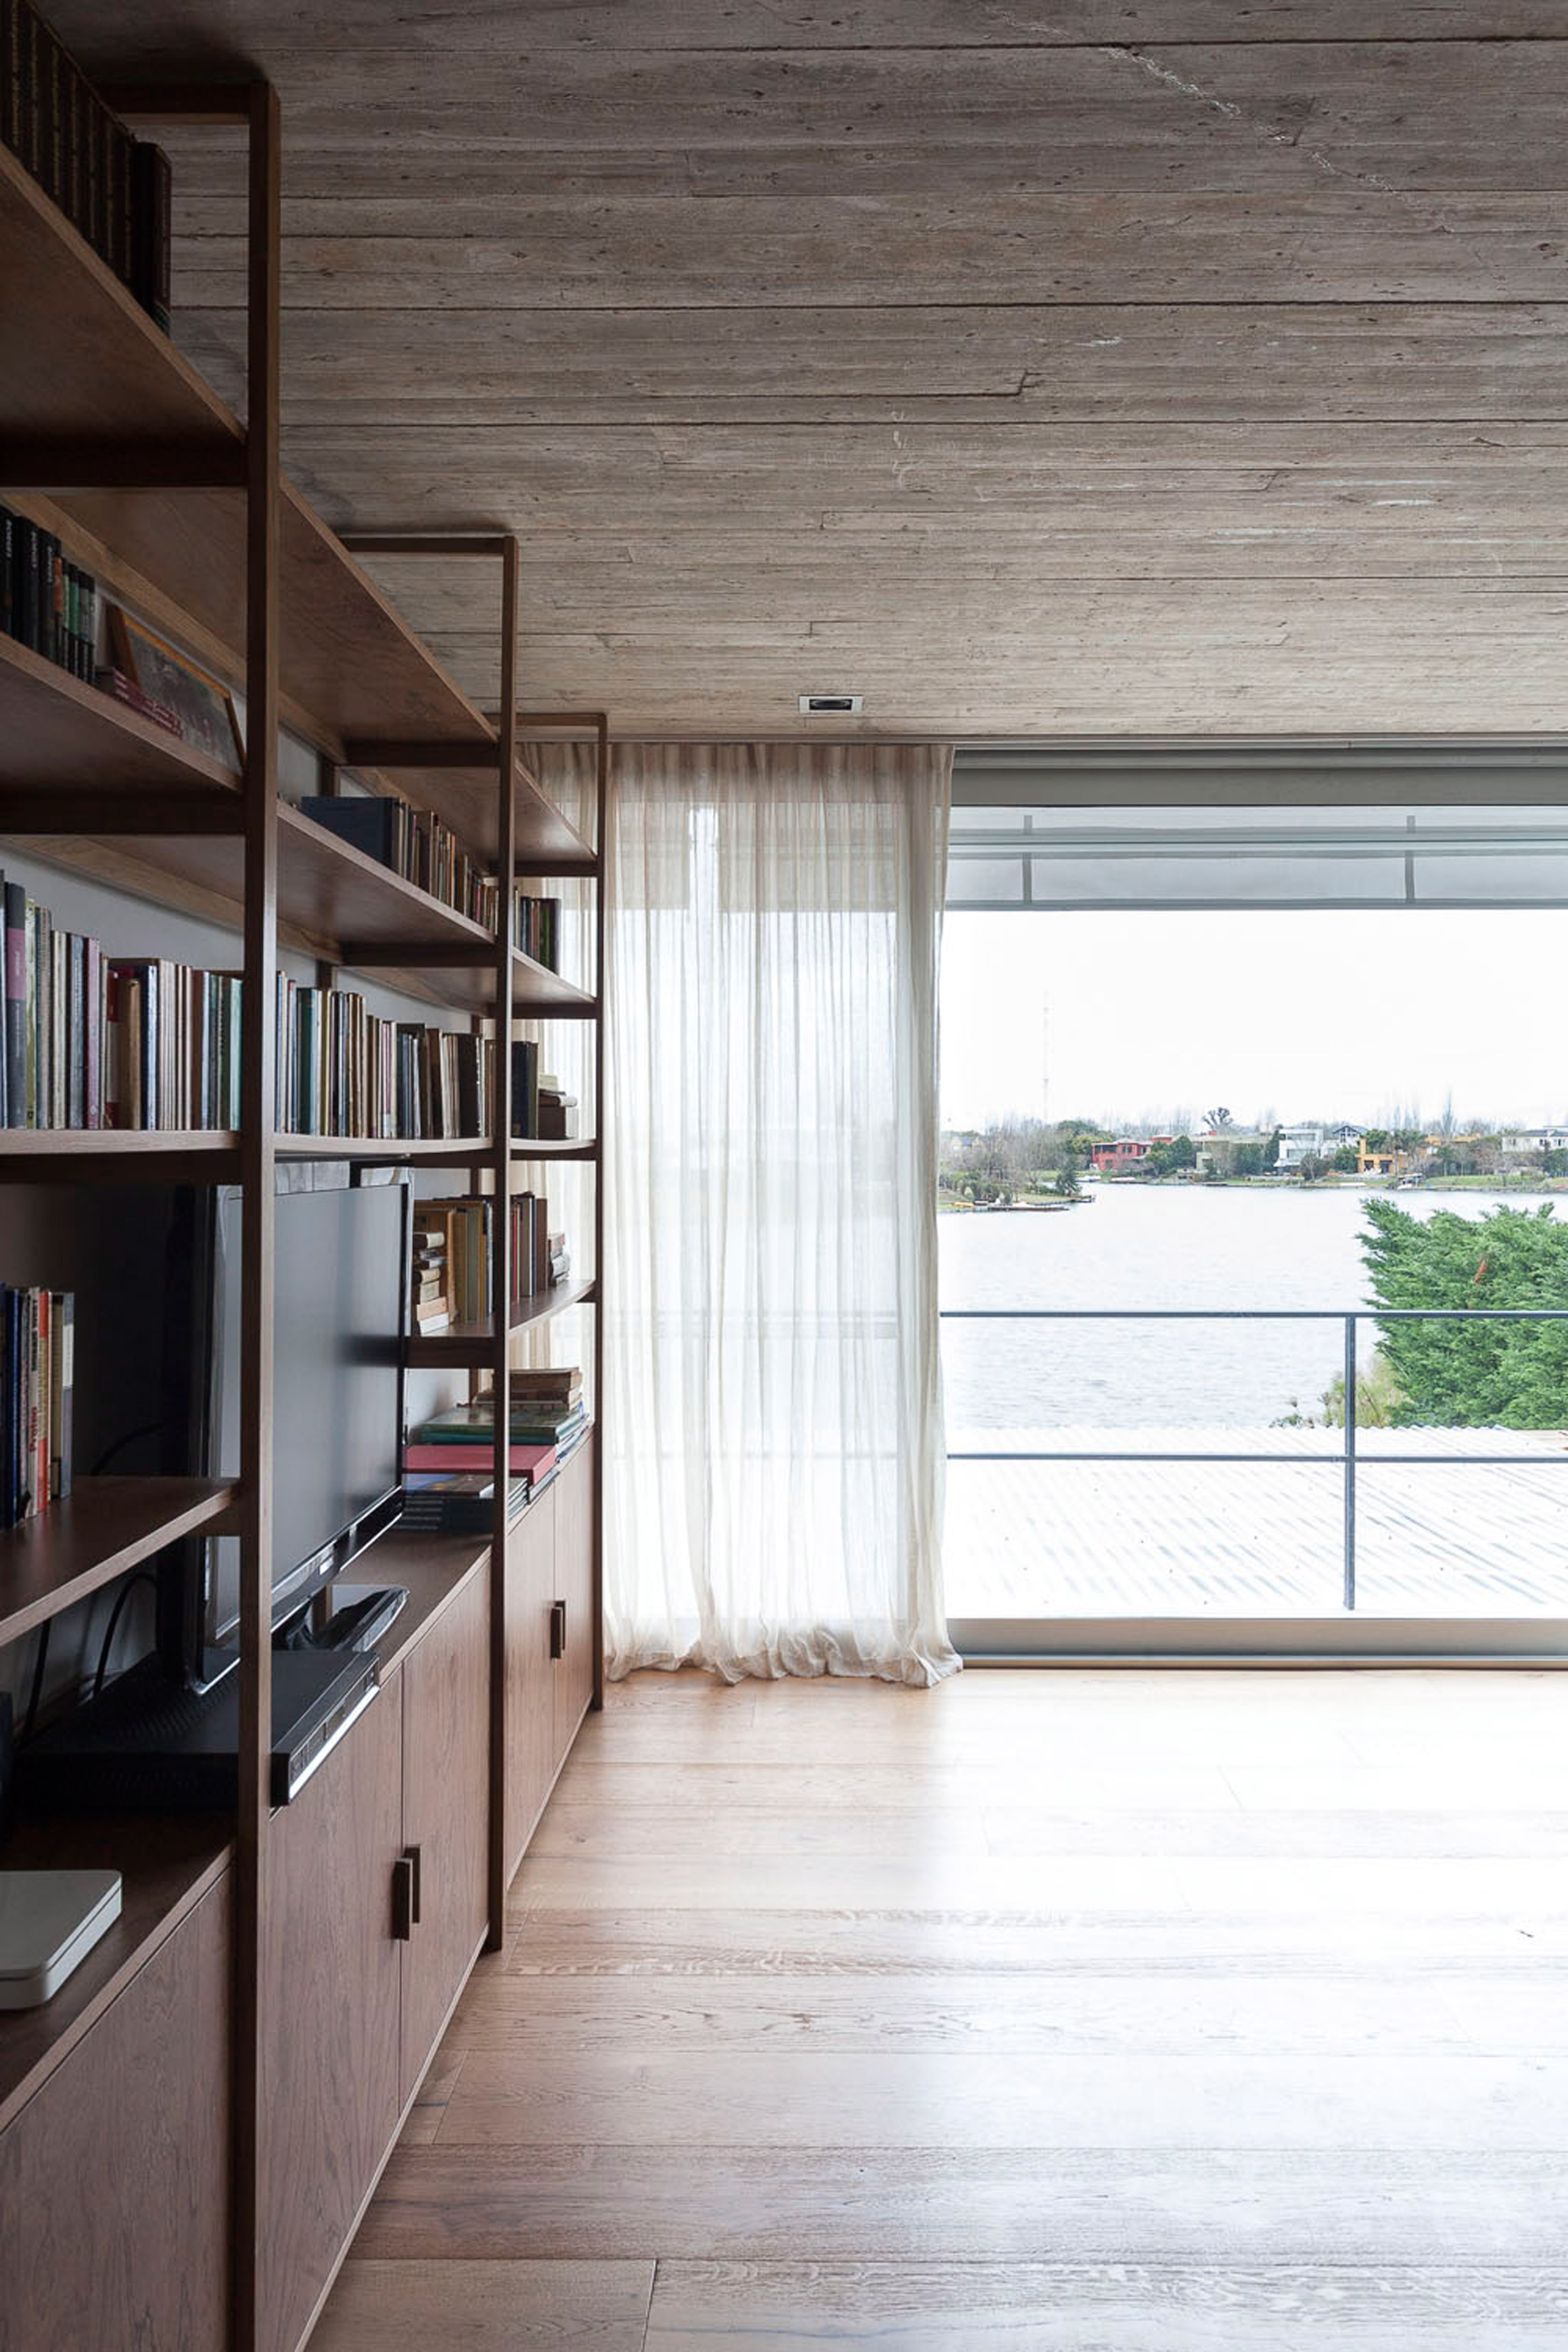 Textured concrete walls frame lake views from Buenos Aires house by Federico Sartor